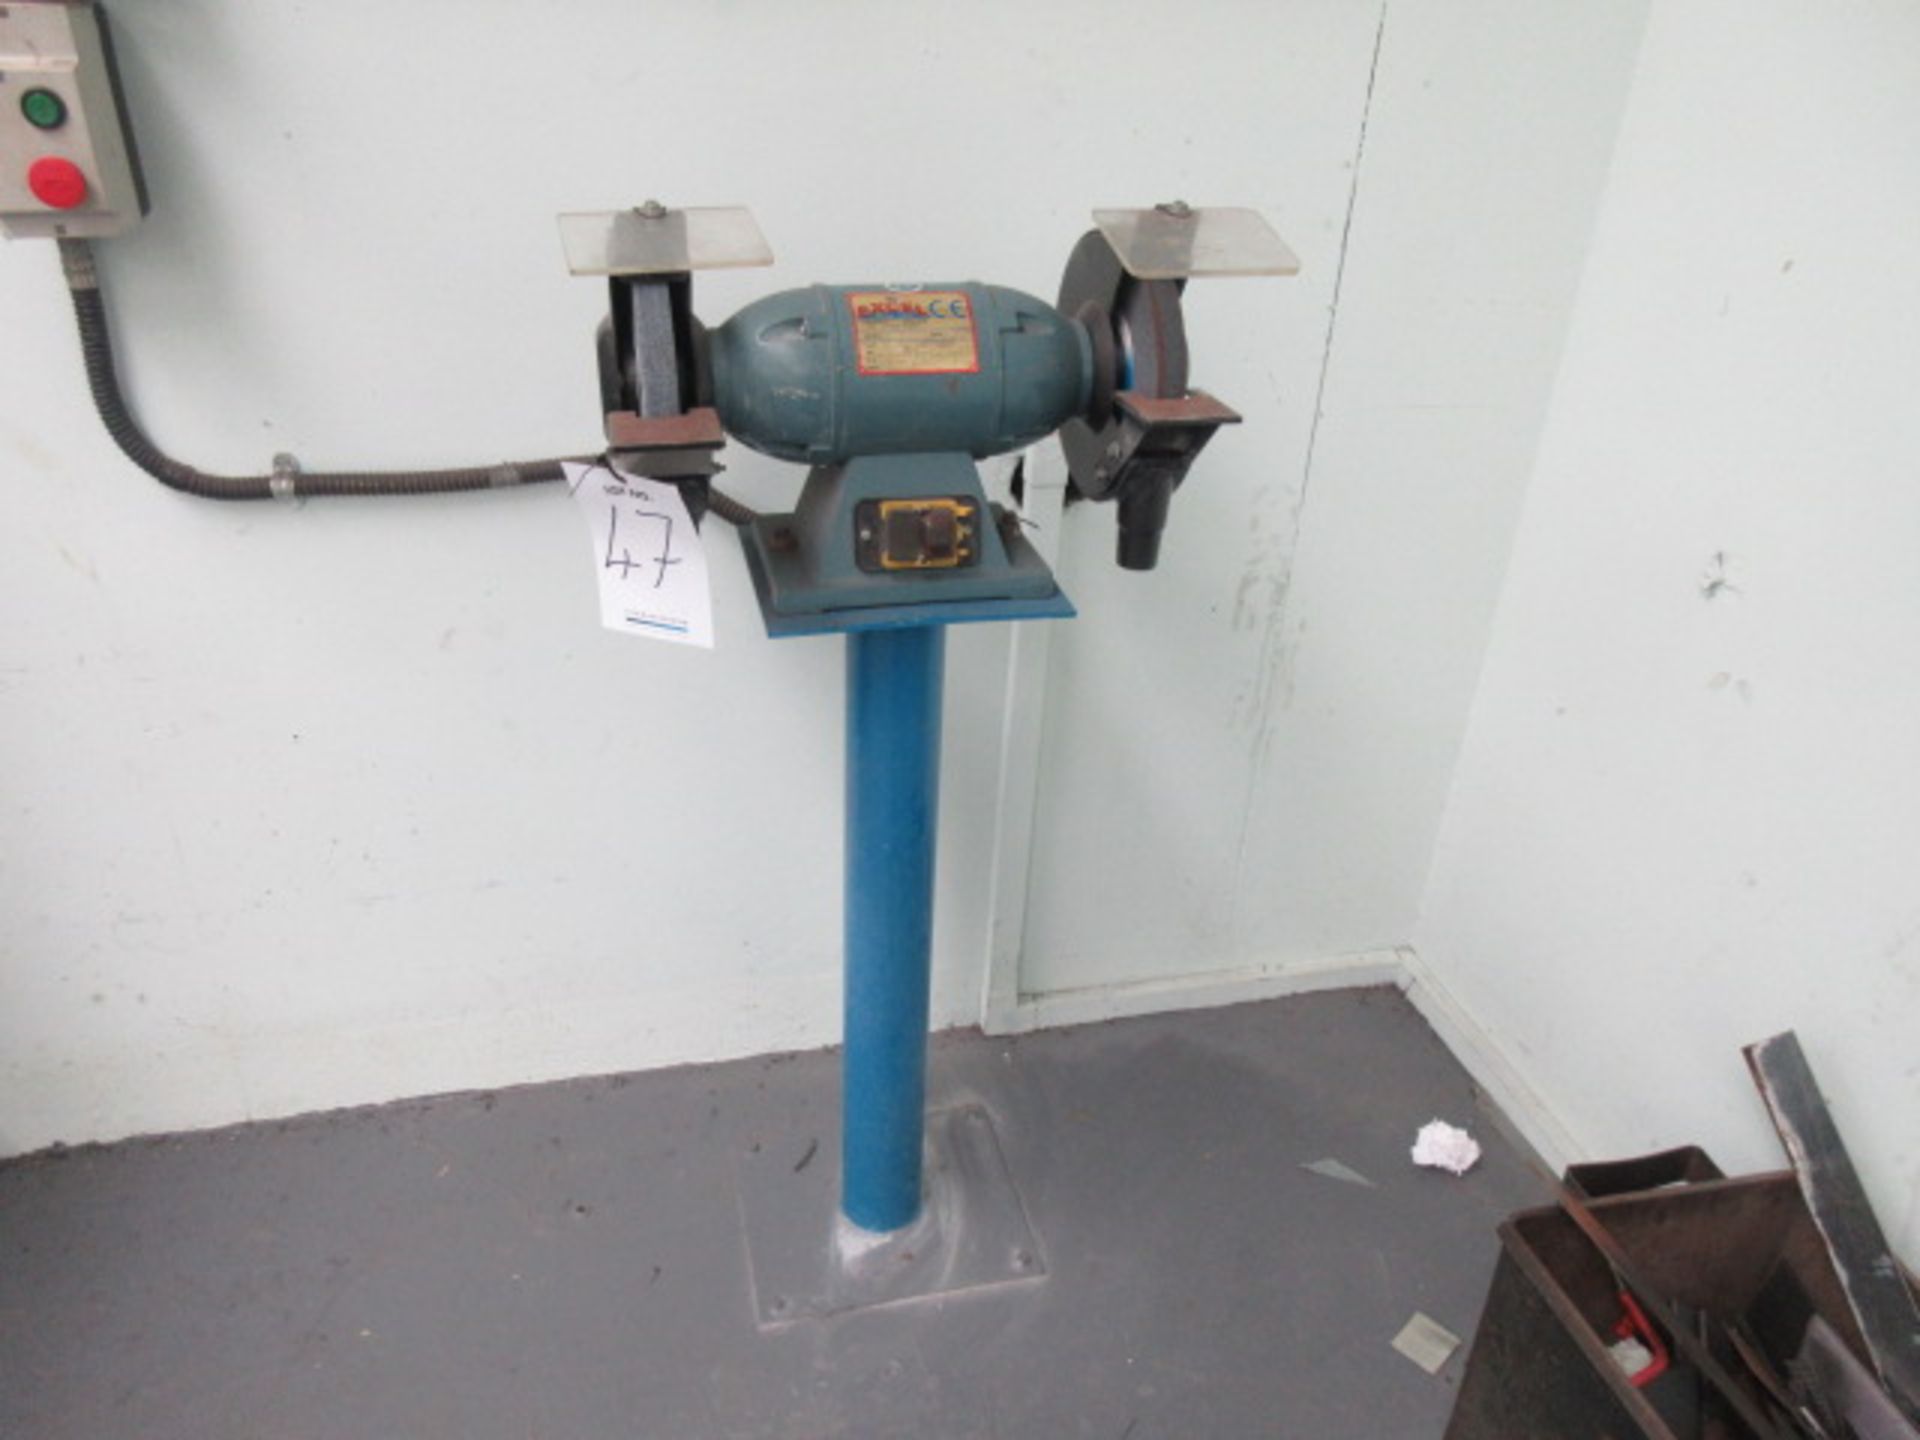 Excel GRB-202 8" double ended pedestal grinder, 2850 rpm. Sn 076464 Holehouse Rd. Ground floor